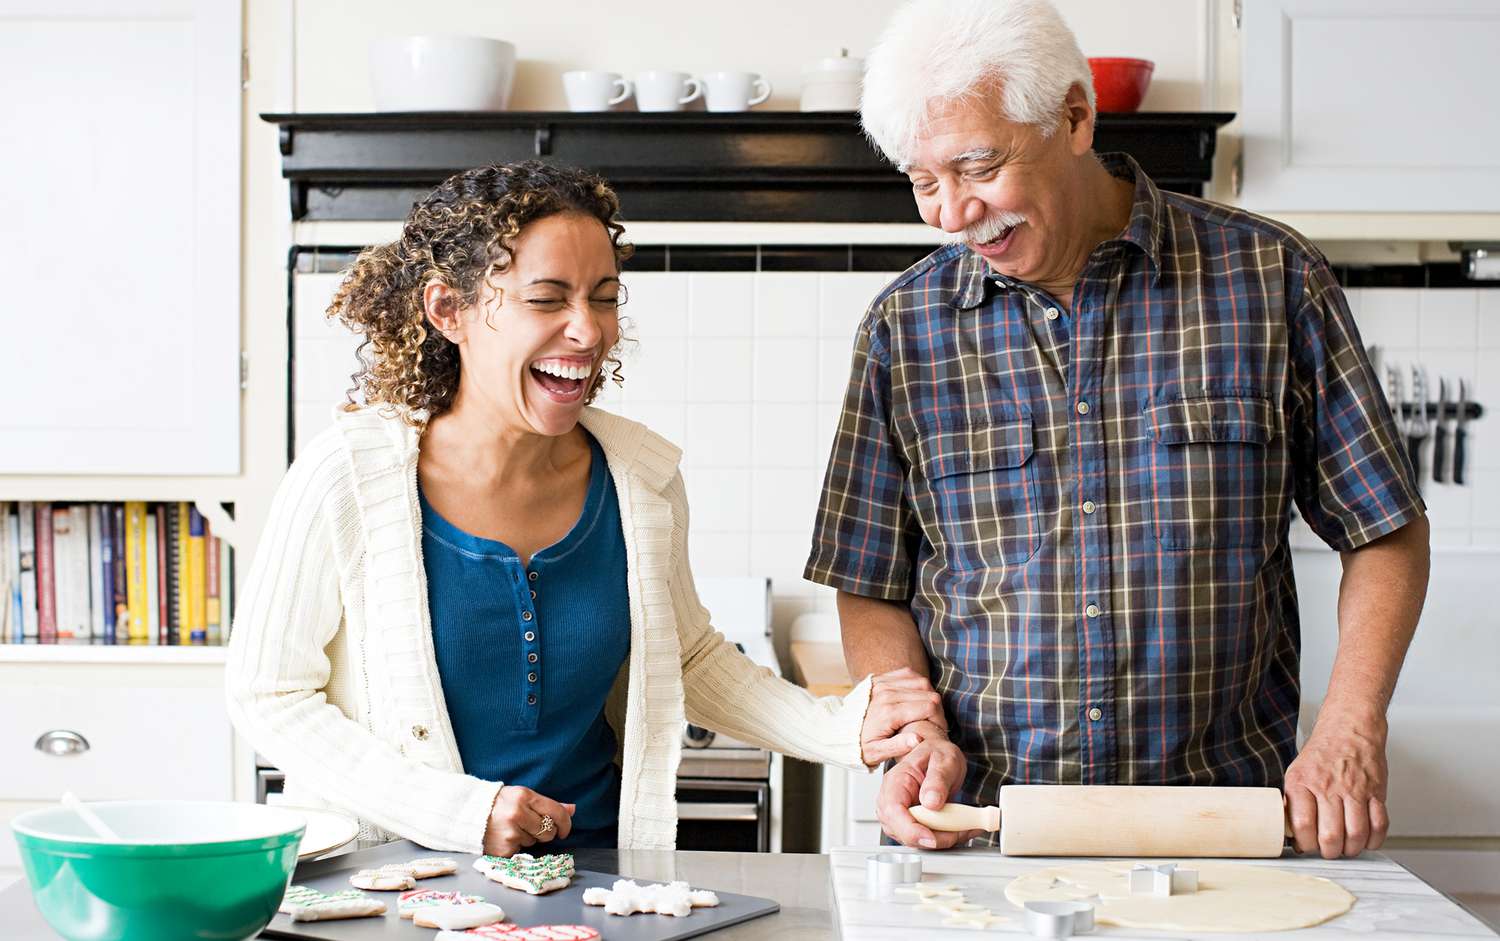 An ethnic father and adult daughter laughing while making cookies